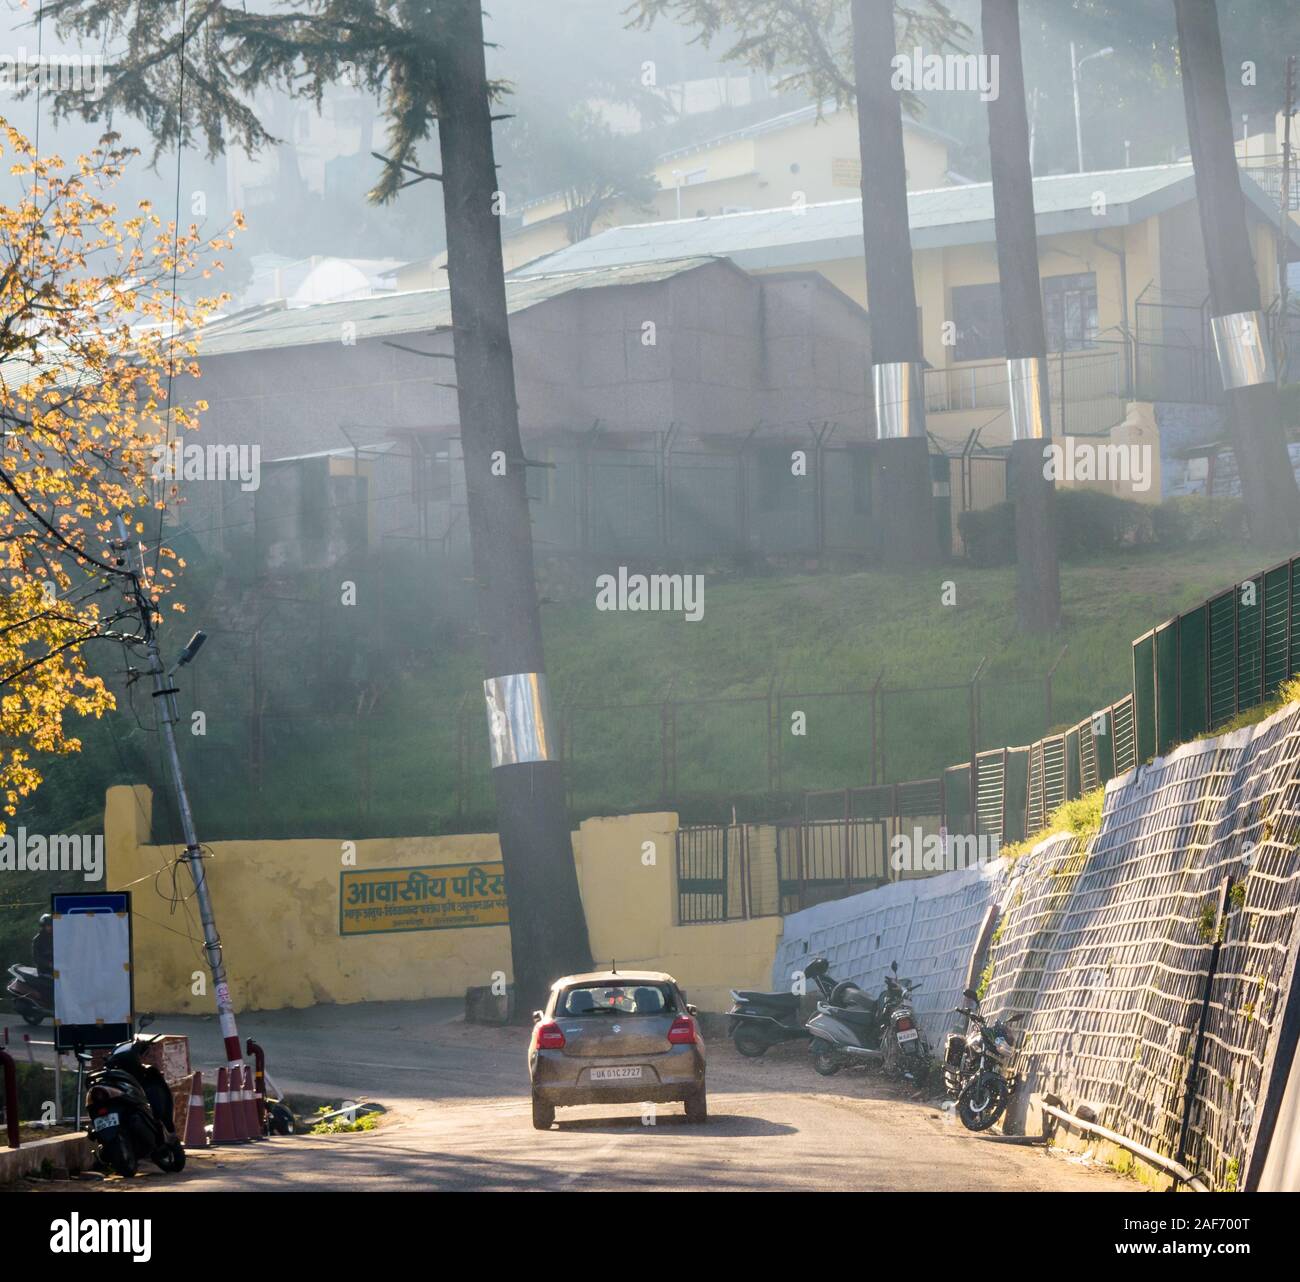 Shafts of light hit the trees and the buildings of the Almora Cantontment in the early morning mist. A Maruti Suzuki drives down the road. Stock Photo